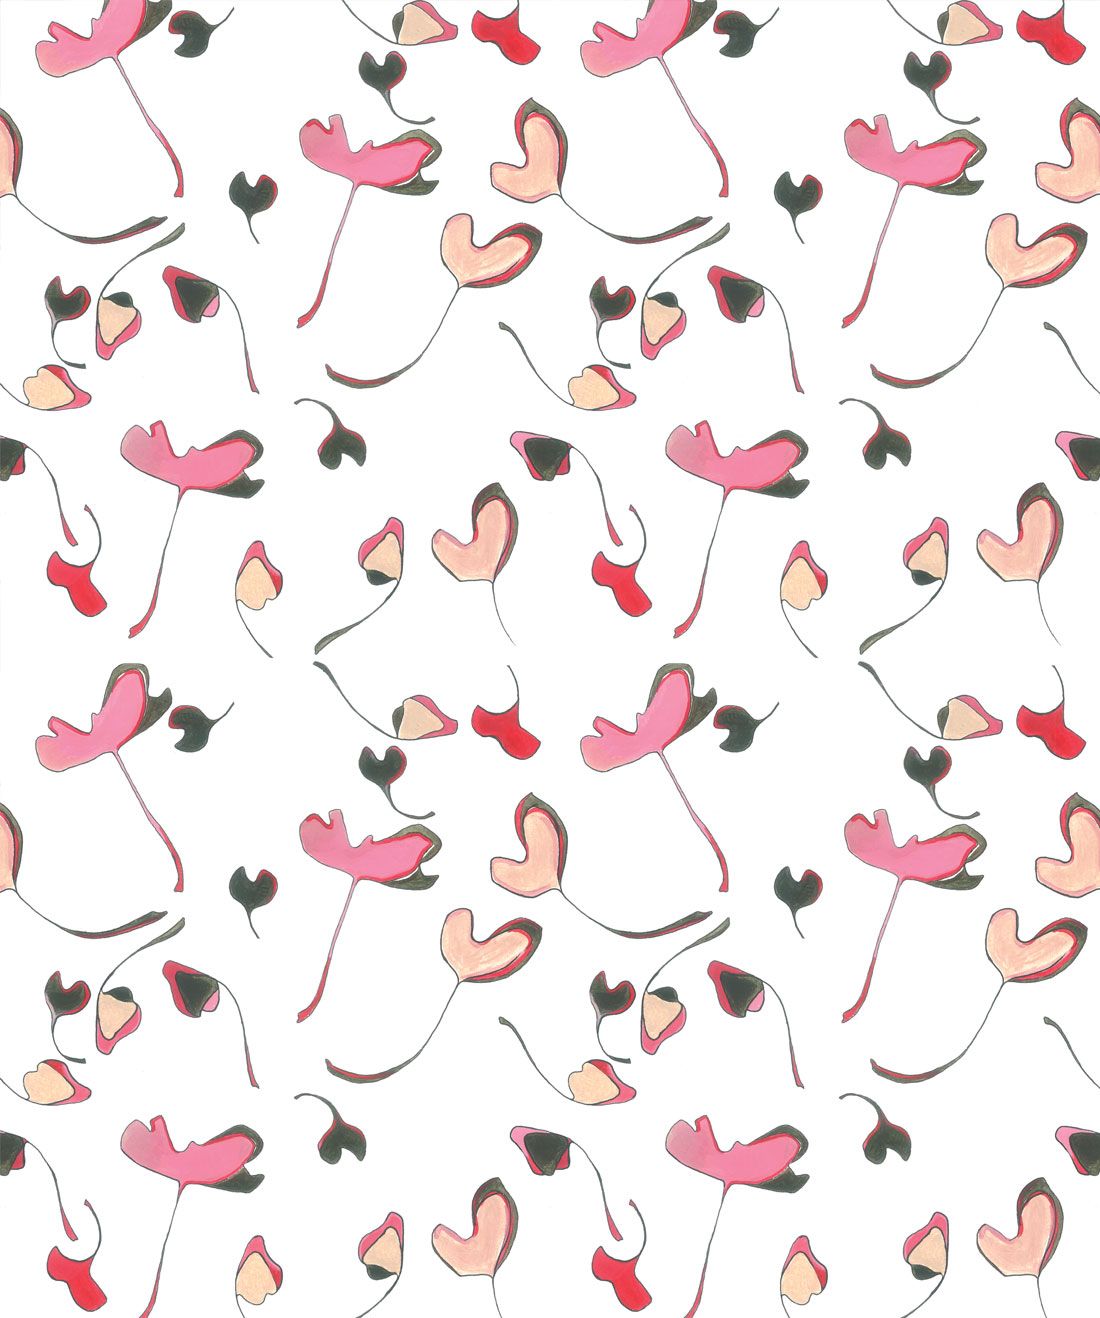 Lush Life is a Simple Floral Wallpaper